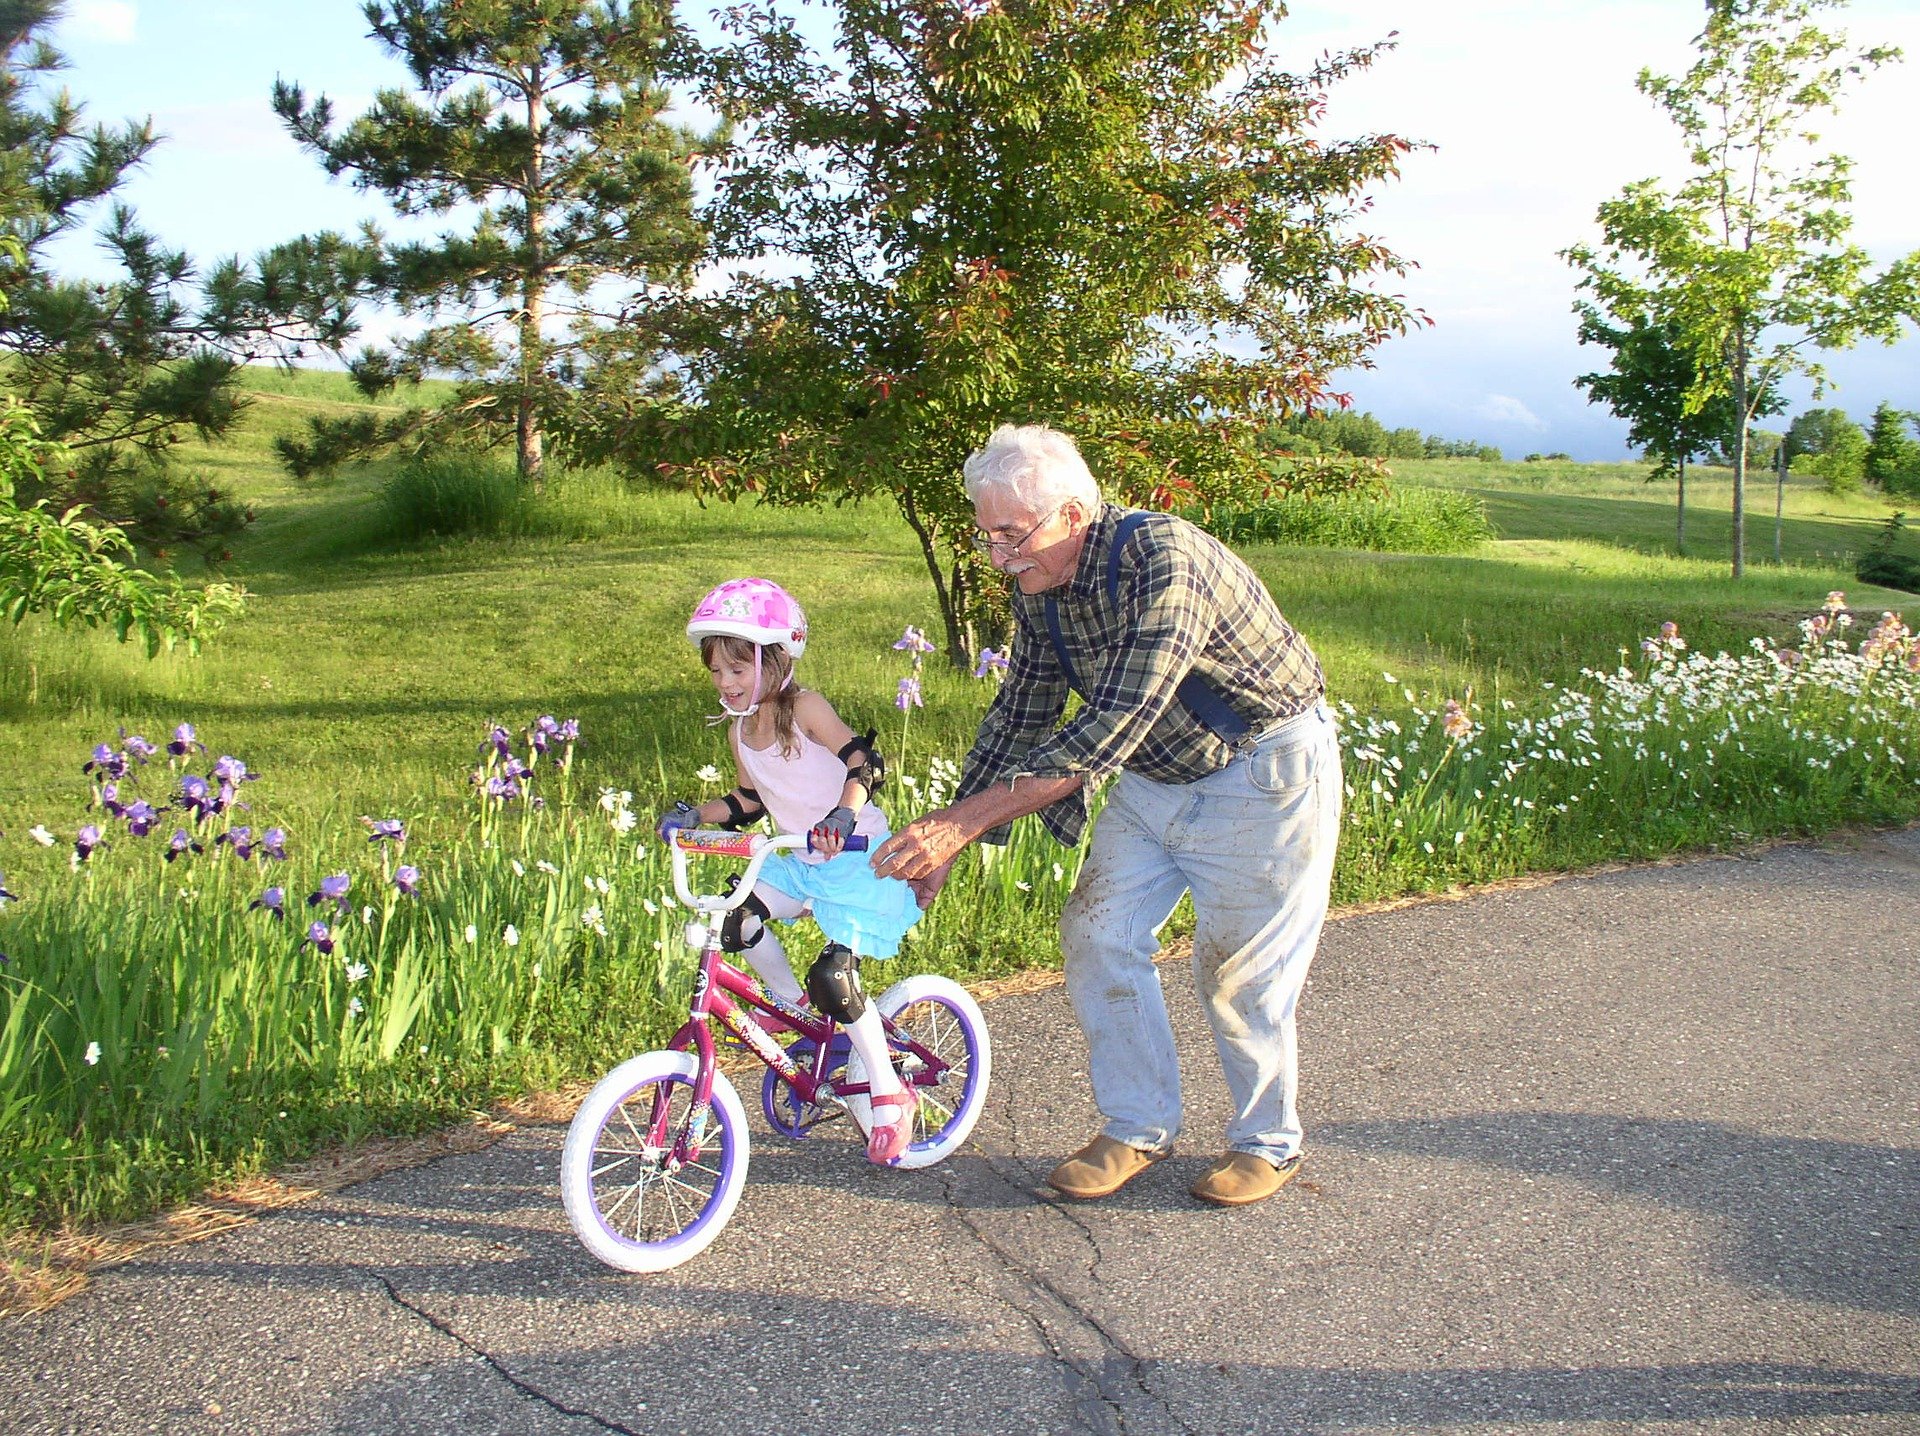 A granddaughter being pushed around on her bicycle. | Source: Pixabay.